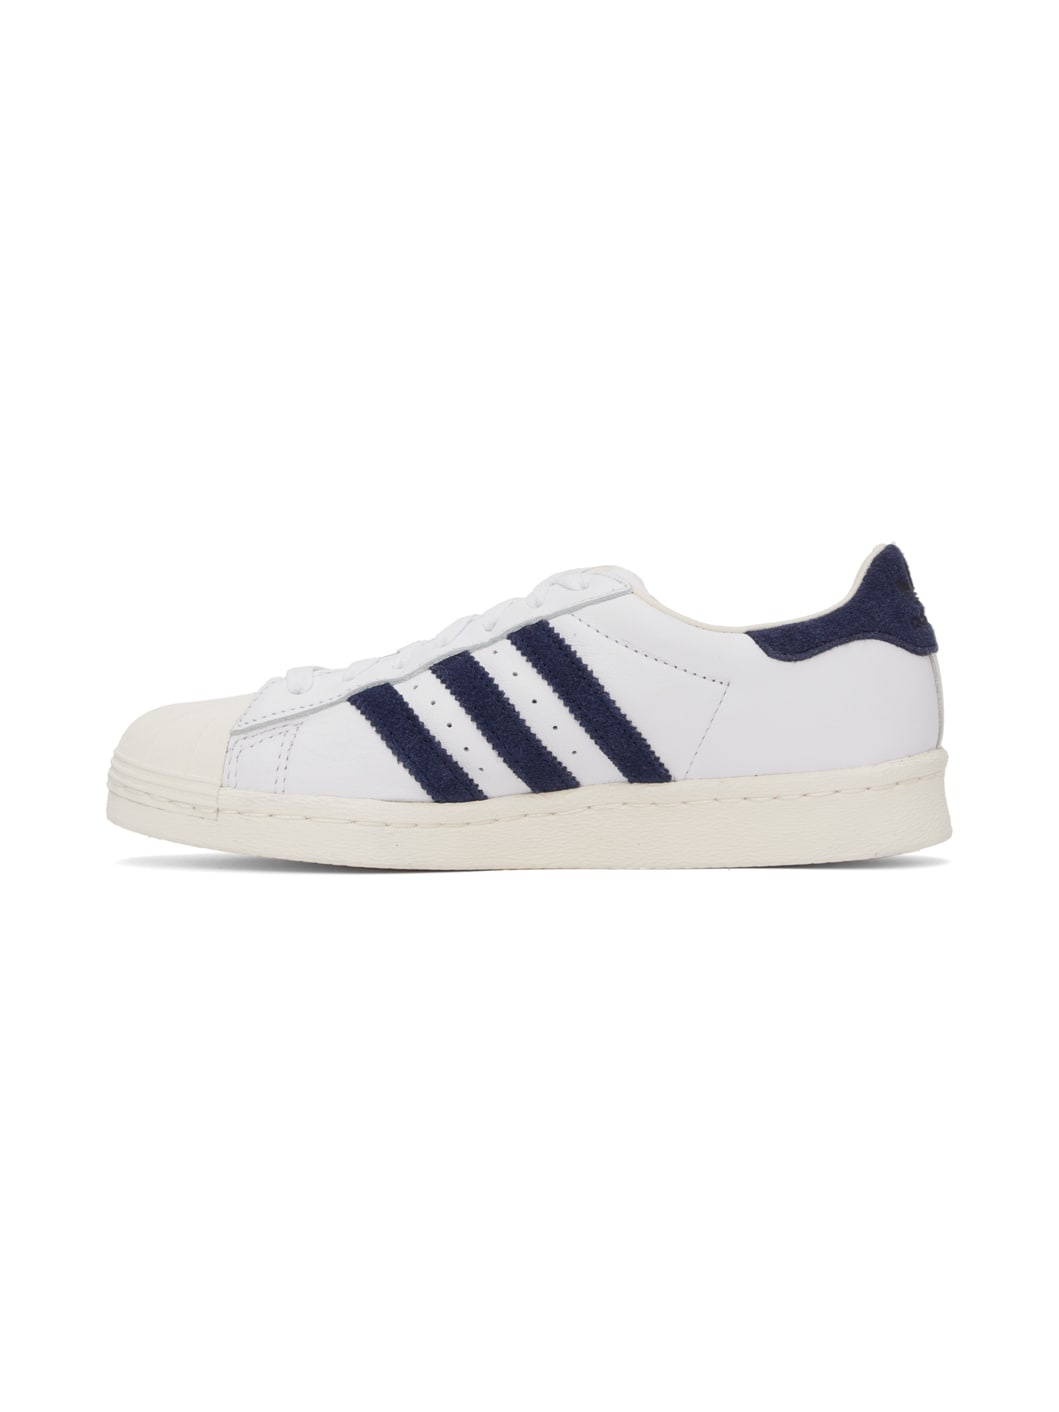 White & Navy Pop Trading Company Edition Superstar ADV Sneakers - 3